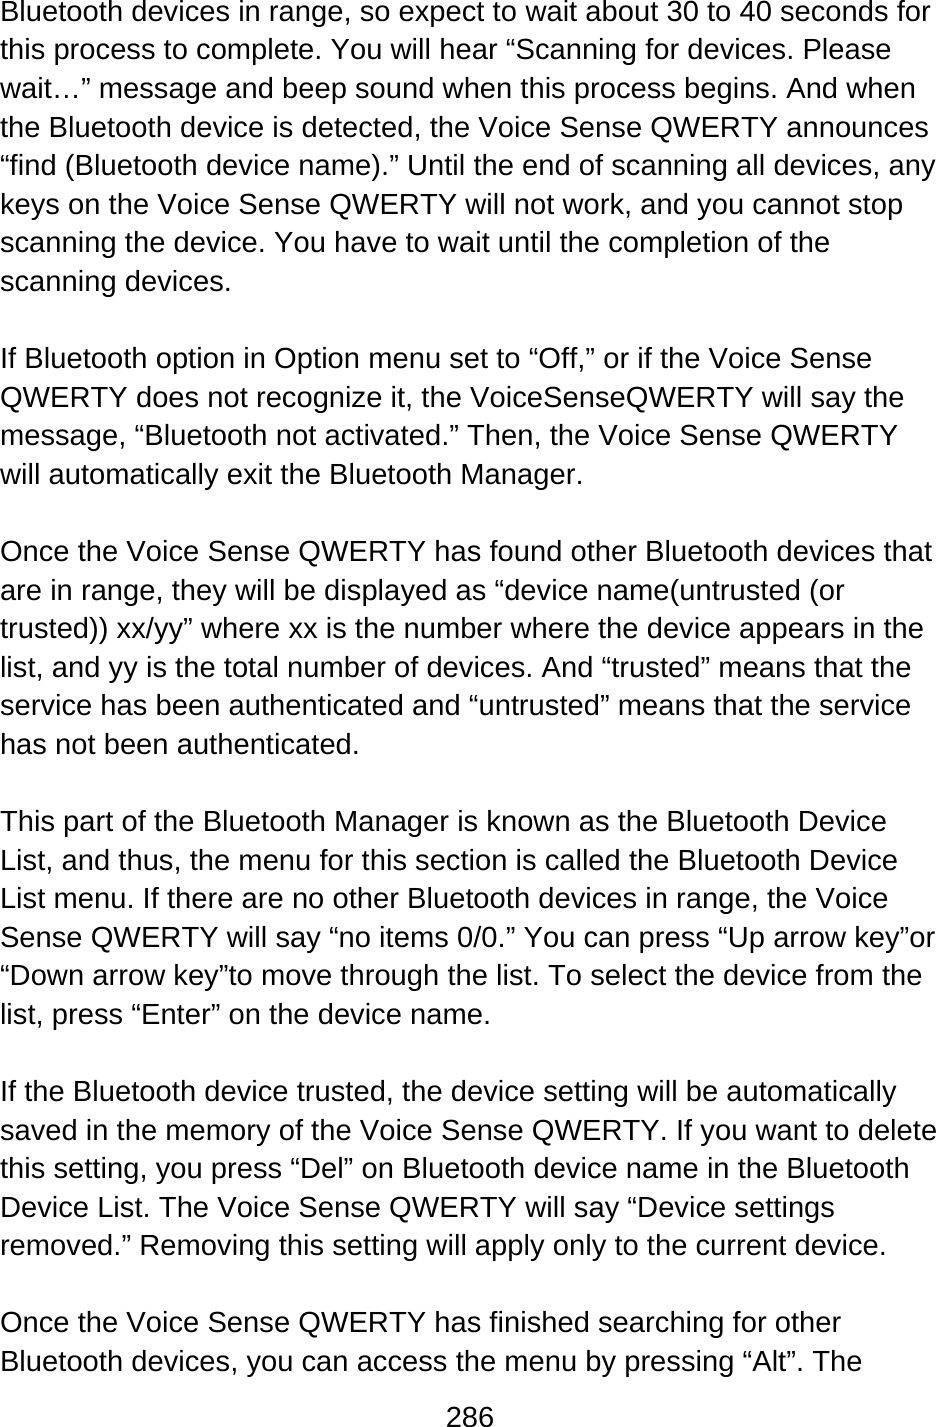 286  Bluetooth devices in range, so expect to wait about 30 to 40 seconds for this process to complete. You will hear “Scanning for devices. Please wait…” message and beep sound when this process begins. And when the Bluetooth device is detected, the Voice Sense QWERTY announces “find (Bluetooth device name).” Until the end of scanning all devices, any keys on the Voice Sense QWERTY will not work, and you cannot stop scanning the device. You have to wait until the completion of the scanning devices.  If Bluetooth option in Option menu set to “Off,” or if the Voice Sense QWERTY does not recognize it, the VoiceSenseQWERTY will say the message, “Bluetooth not activated.” Then, the Voice Sense QWERTY will automatically exit the Bluetooth Manager.  Once the Voice Sense QWERTY has found other Bluetooth devices that are in range, they will be displayed as “device name(untrusted (or trusted)) xx/yy” where xx is the number where the device appears in the list, and yy is the total number of devices. And “trusted” means that the service has been authenticated and “untrusted” means that the service has not been authenticated.  This part of the Bluetooth Manager is known as the Bluetooth Device List, and thus, the menu for this section is called the Bluetooth Device List menu. If there are no other Bluetooth devices in range, the Voice Sense QWERTY will say “no items 0/0.” You can press “Up arrow key”or “Down arrow key”to move through the list. To select the device from the list, press “Enter” on the device name.  If the Bluetooth device trusted, the device setting will be automatically saved in the memory of the Voice Sense QWERTY. If you want to delete this setting, you press “Del” on Bluetooth device name in the Bluetooth Device List. The Voice Sense QWERTY will say “Device settings removed.” Removing this setting will apply only to the current device.  Once the Voice Sense QWERTY has finished searching for other Bluetooth devices, you can access the menu by pressing “Alt”. The 